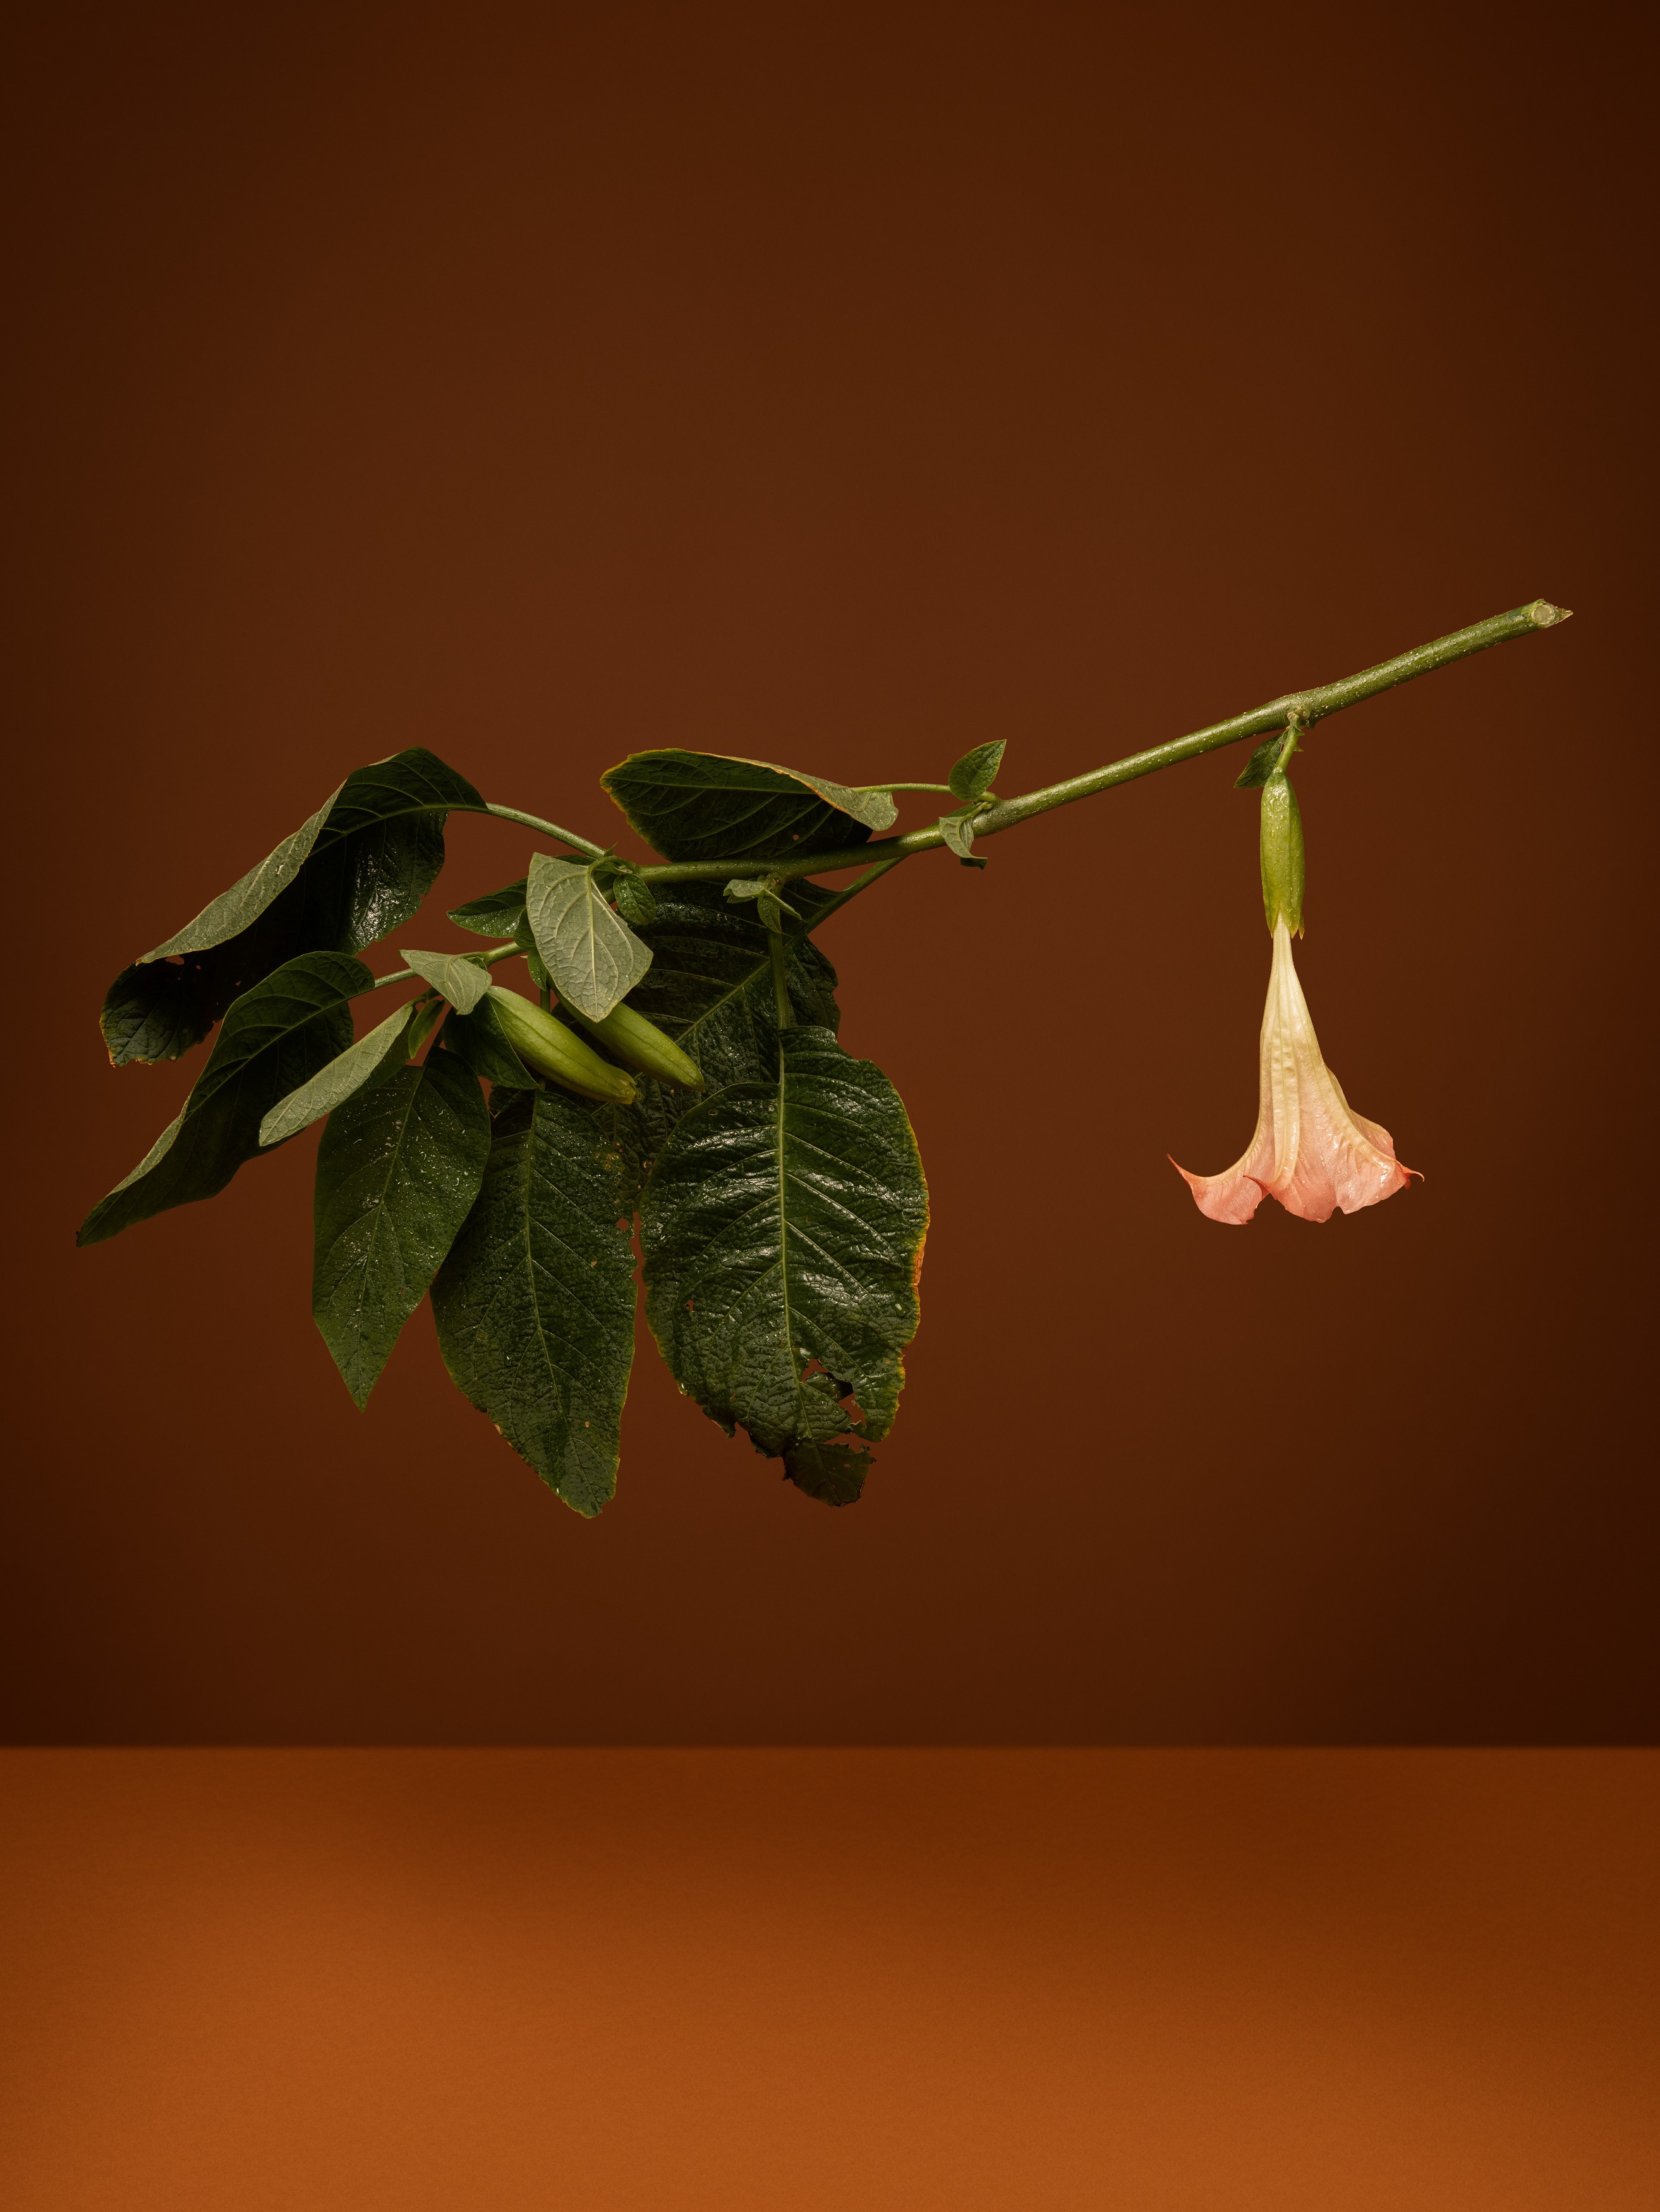 Ann Shelton, On certain days or nights she anoints a staff and rides (Brugmansia, Angels Trumpet, snowy angel's trumpet, angel's tears, Datura [misleading]), 2022-ongoing, archival pigment print on Hahnemühle Bamboo.  